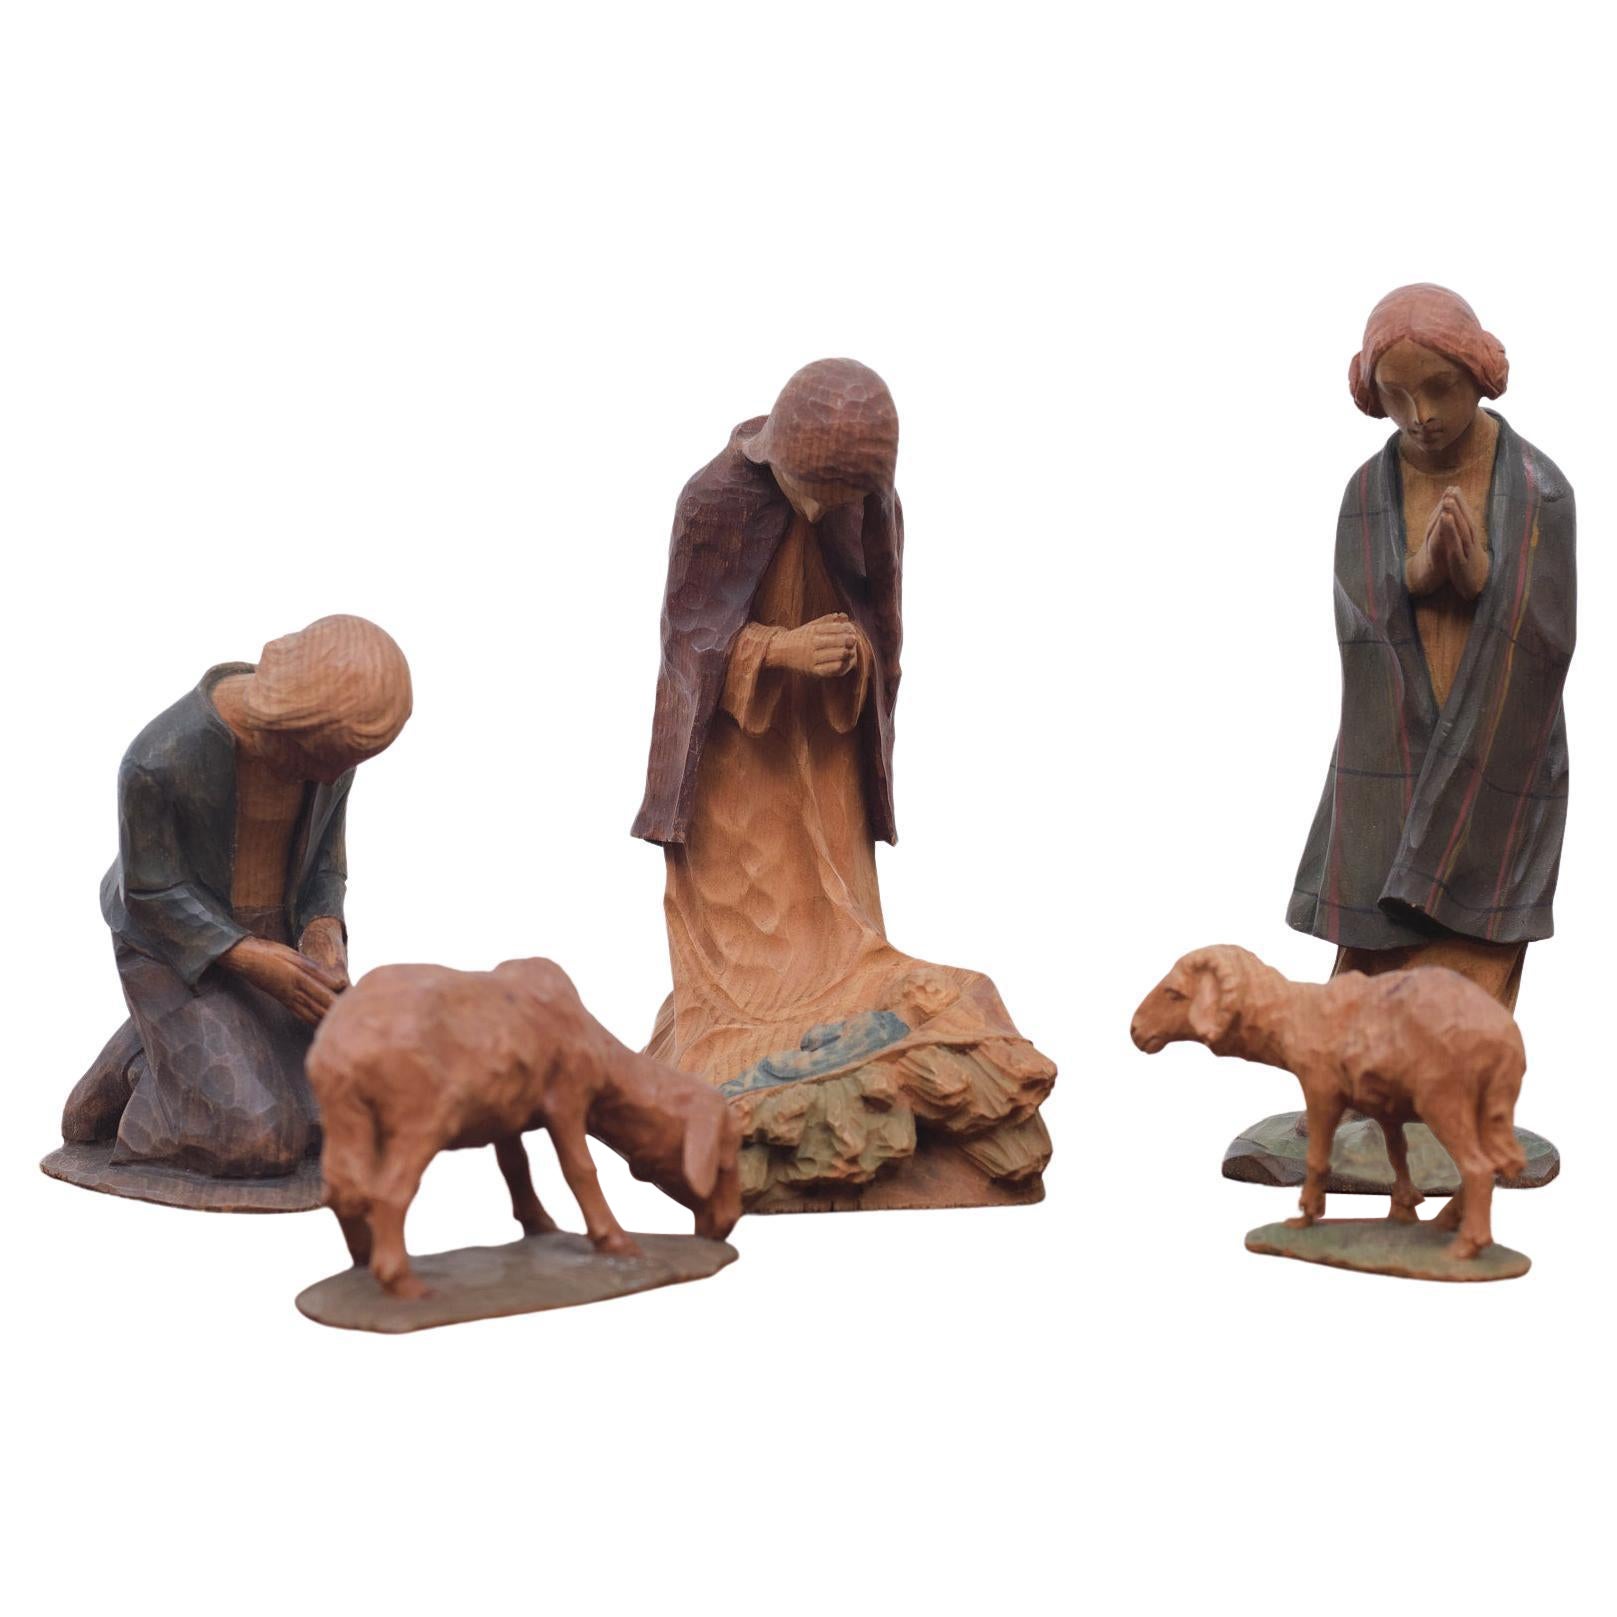 Vintage Hand-Carved Nativity Scene from Germany